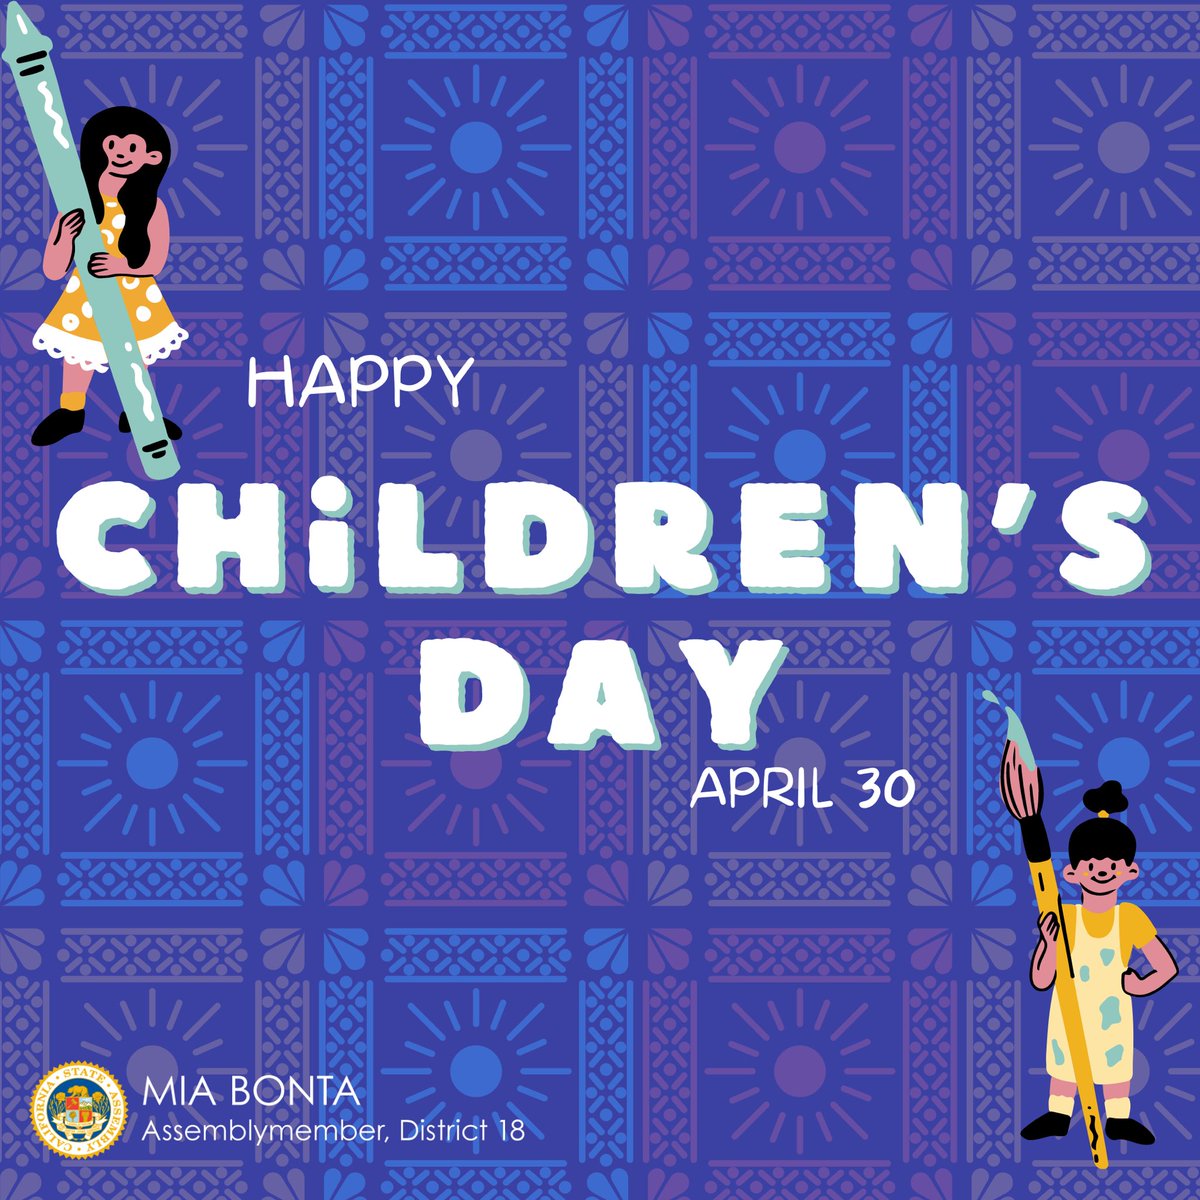 Today, April 30th, reminds us to treasure the bright smiles, playful spirits, and boundless imagination of children from #AD18 and beyond. Happy Día del Niño y la Niña! 🌟 #ChildrensDay